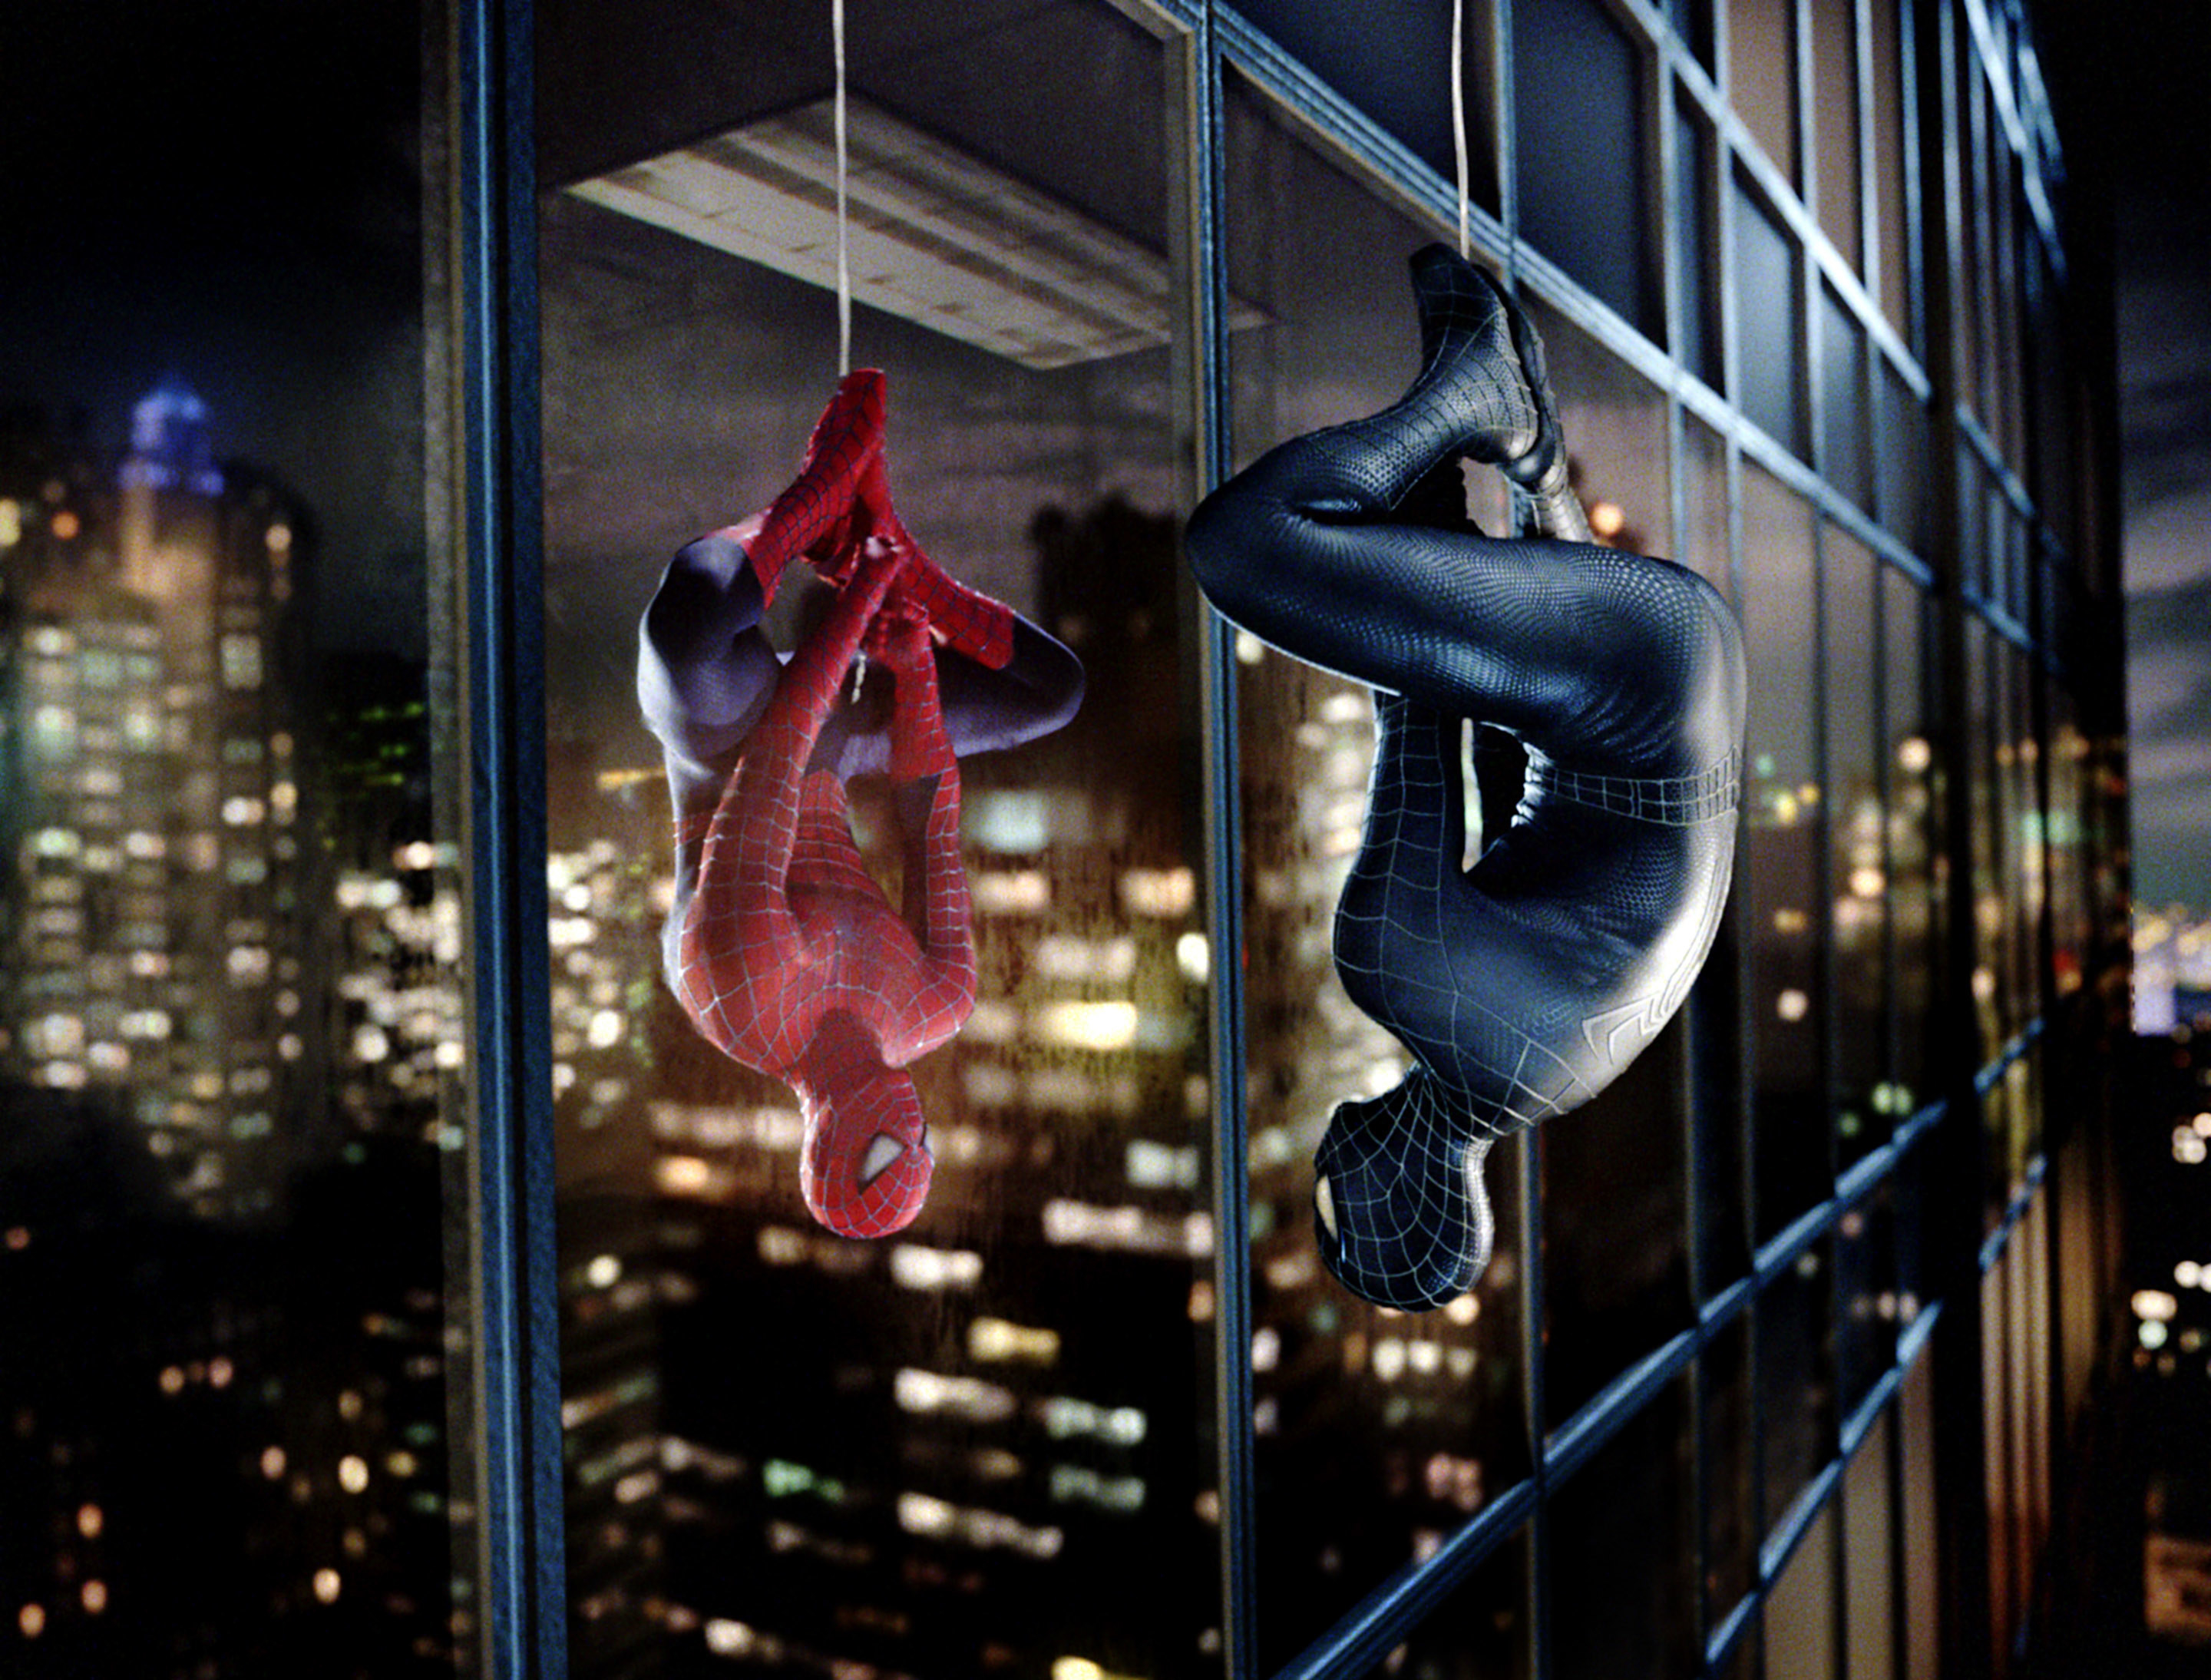 Spidey in his red suit faces Spidey in his black suit